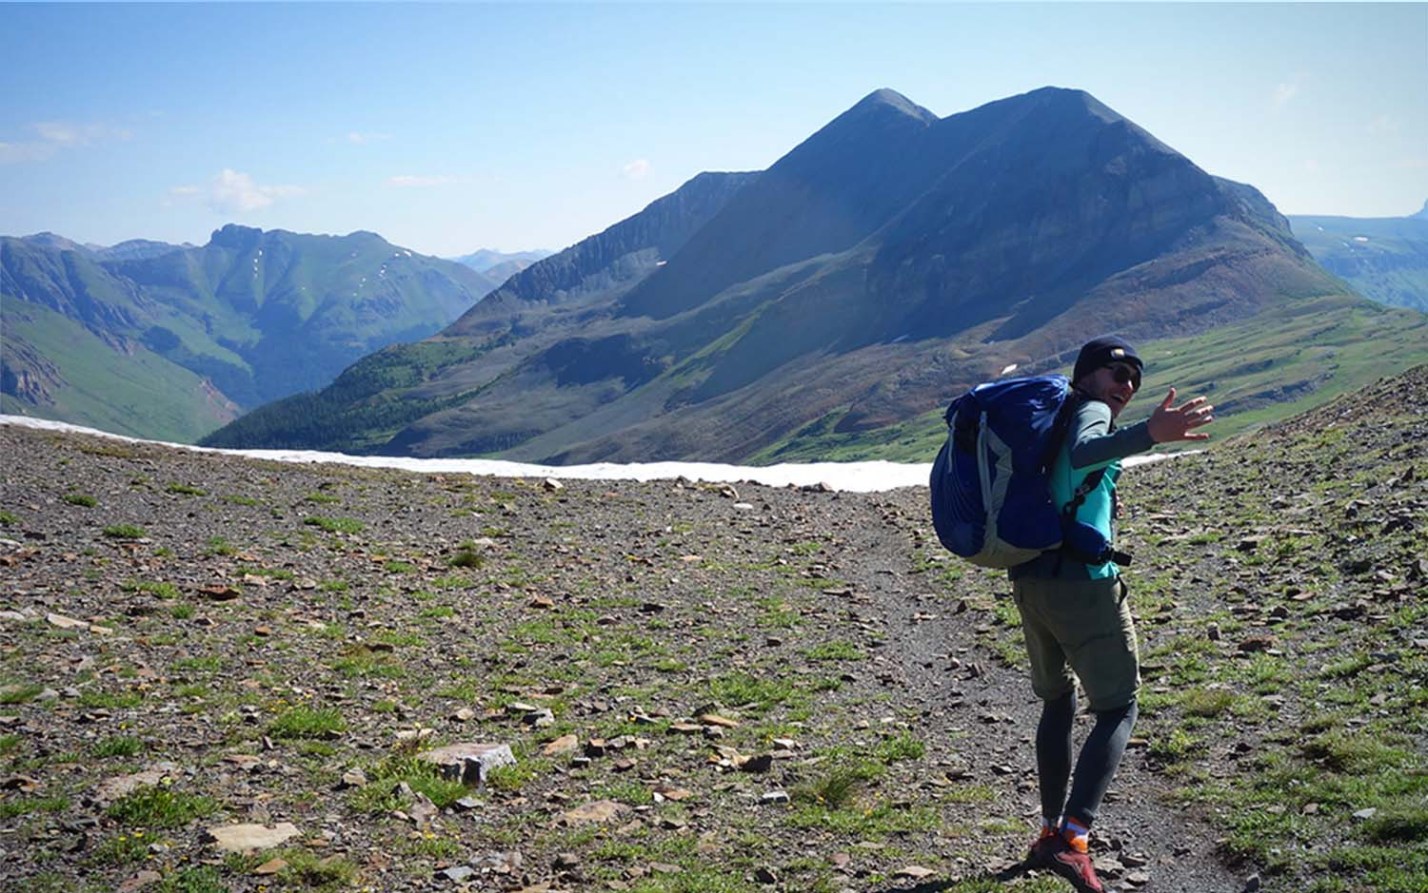 A man wearing a best backpack walking through a field with mountains in the background